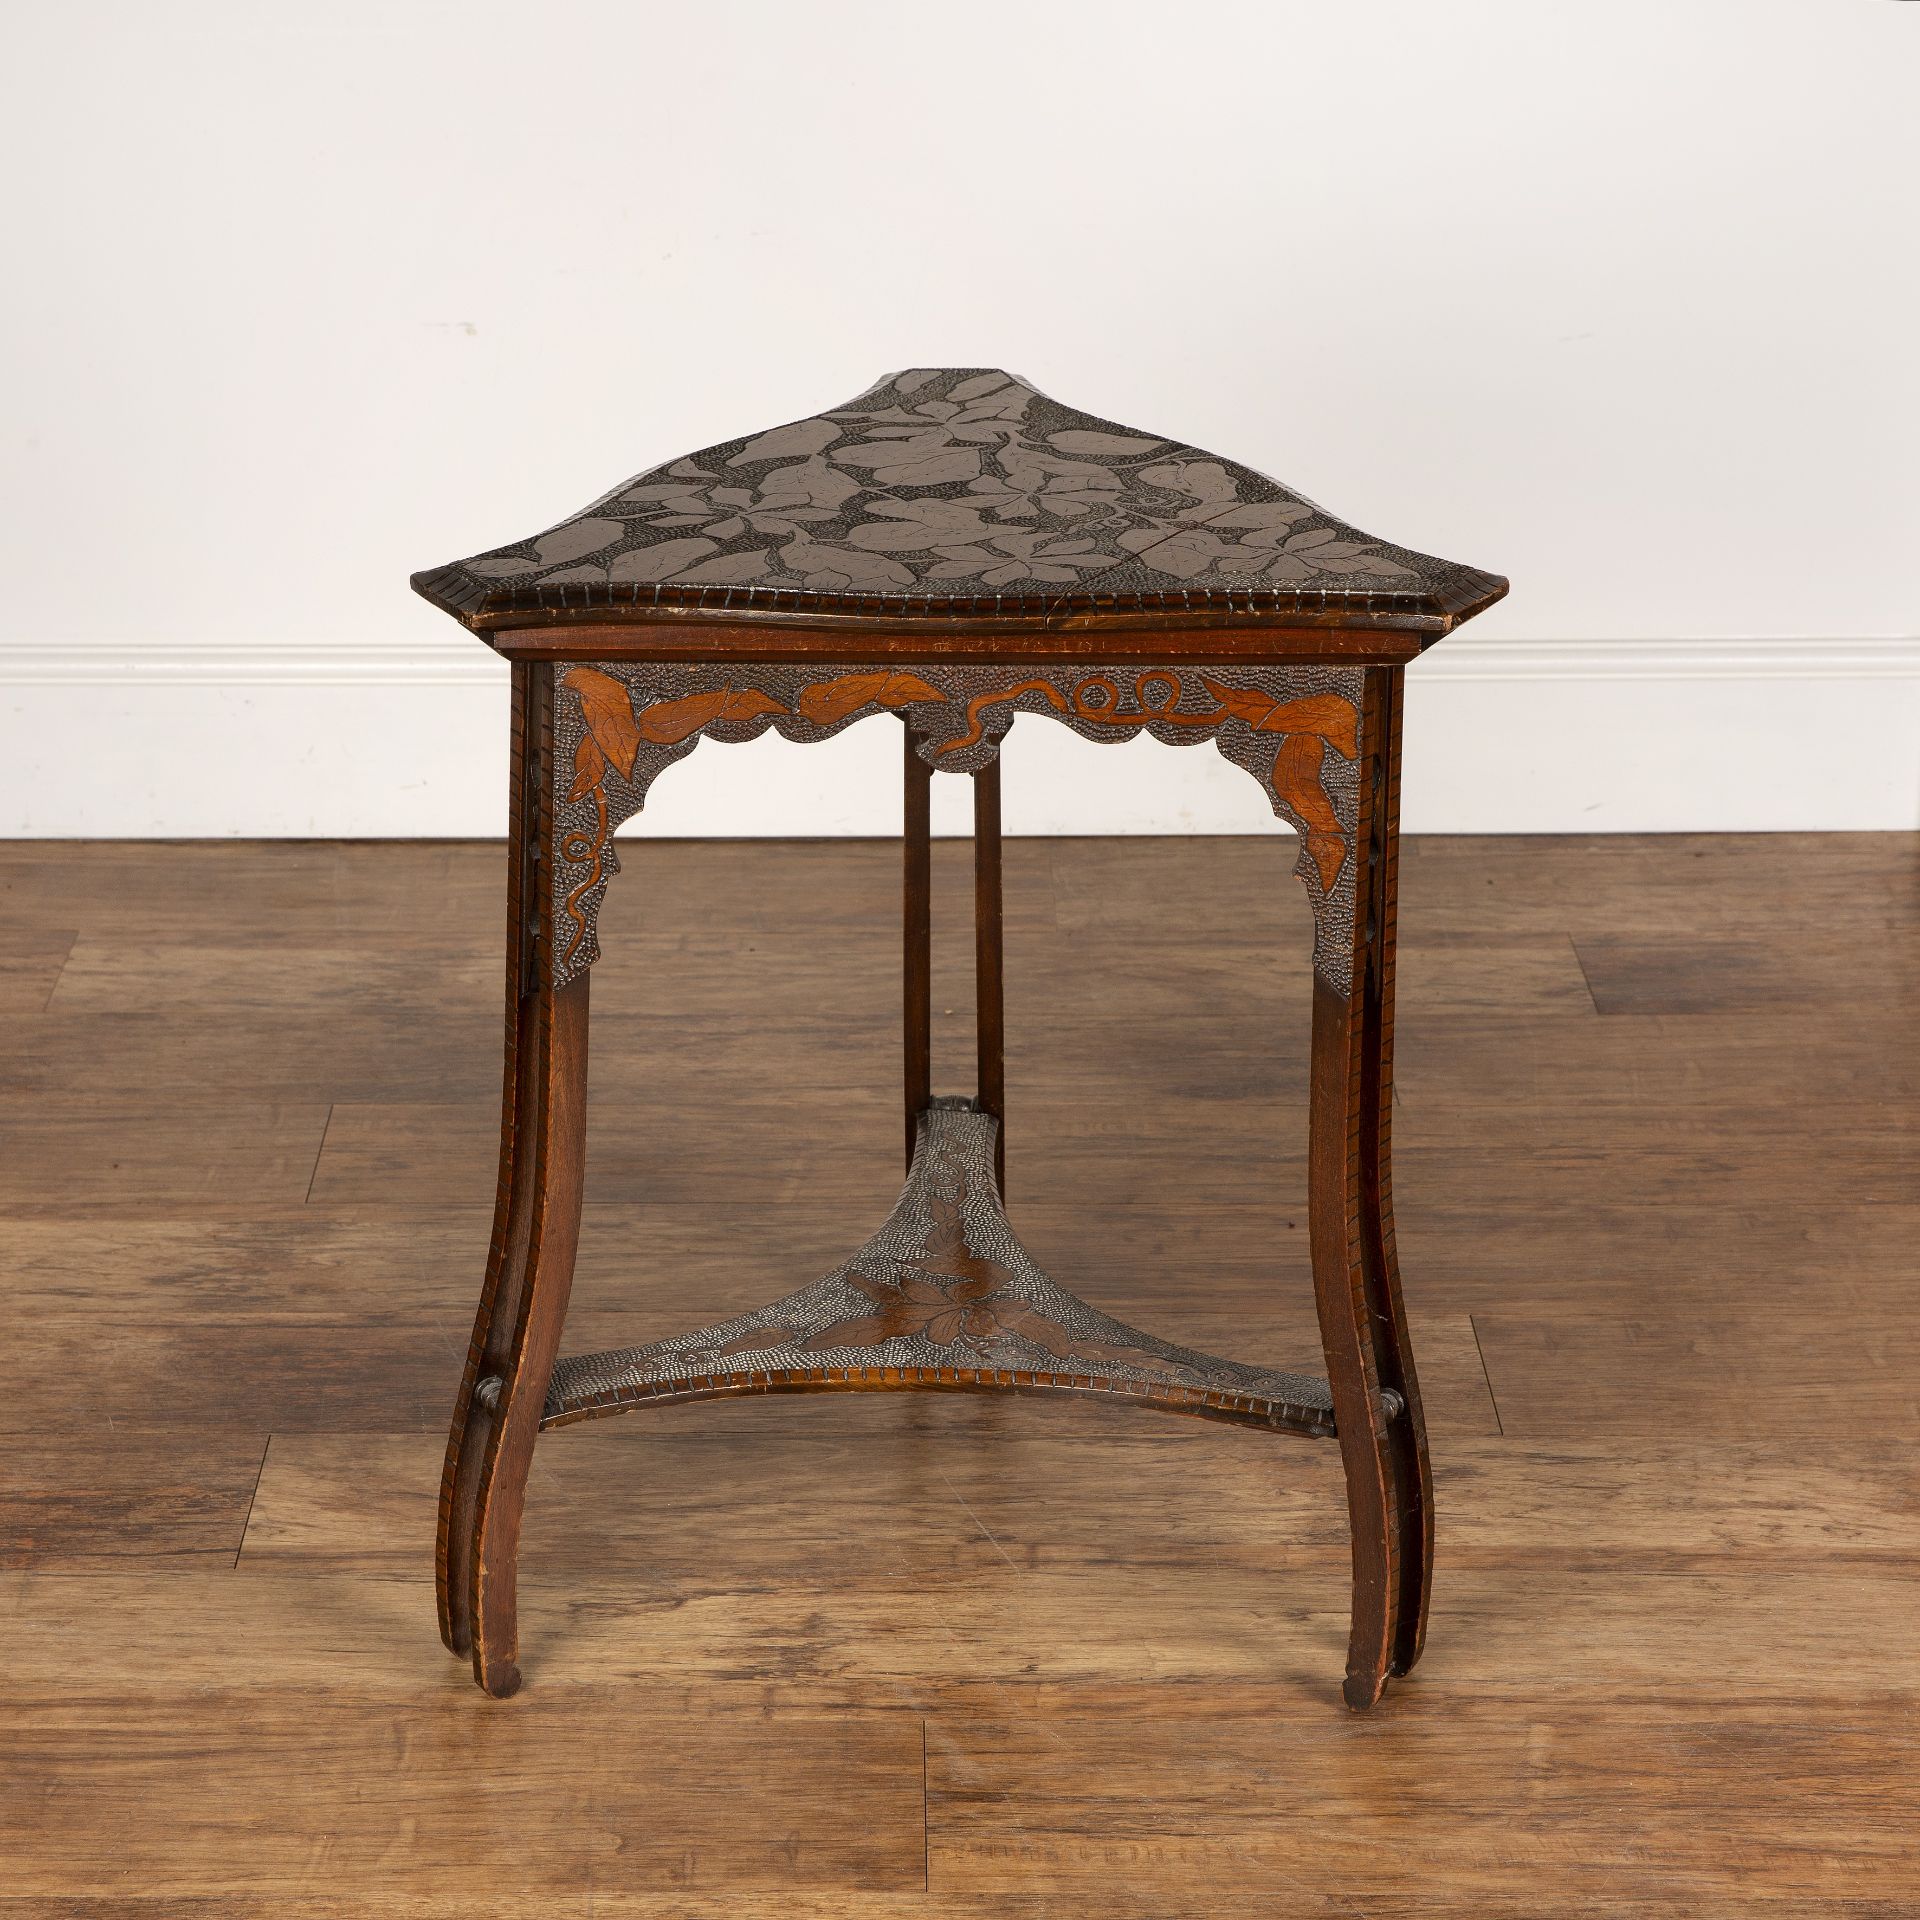 Art Nouveau pokerwork side table, with triangular top, decorated with leaves above a decorated - Image 3 of 6